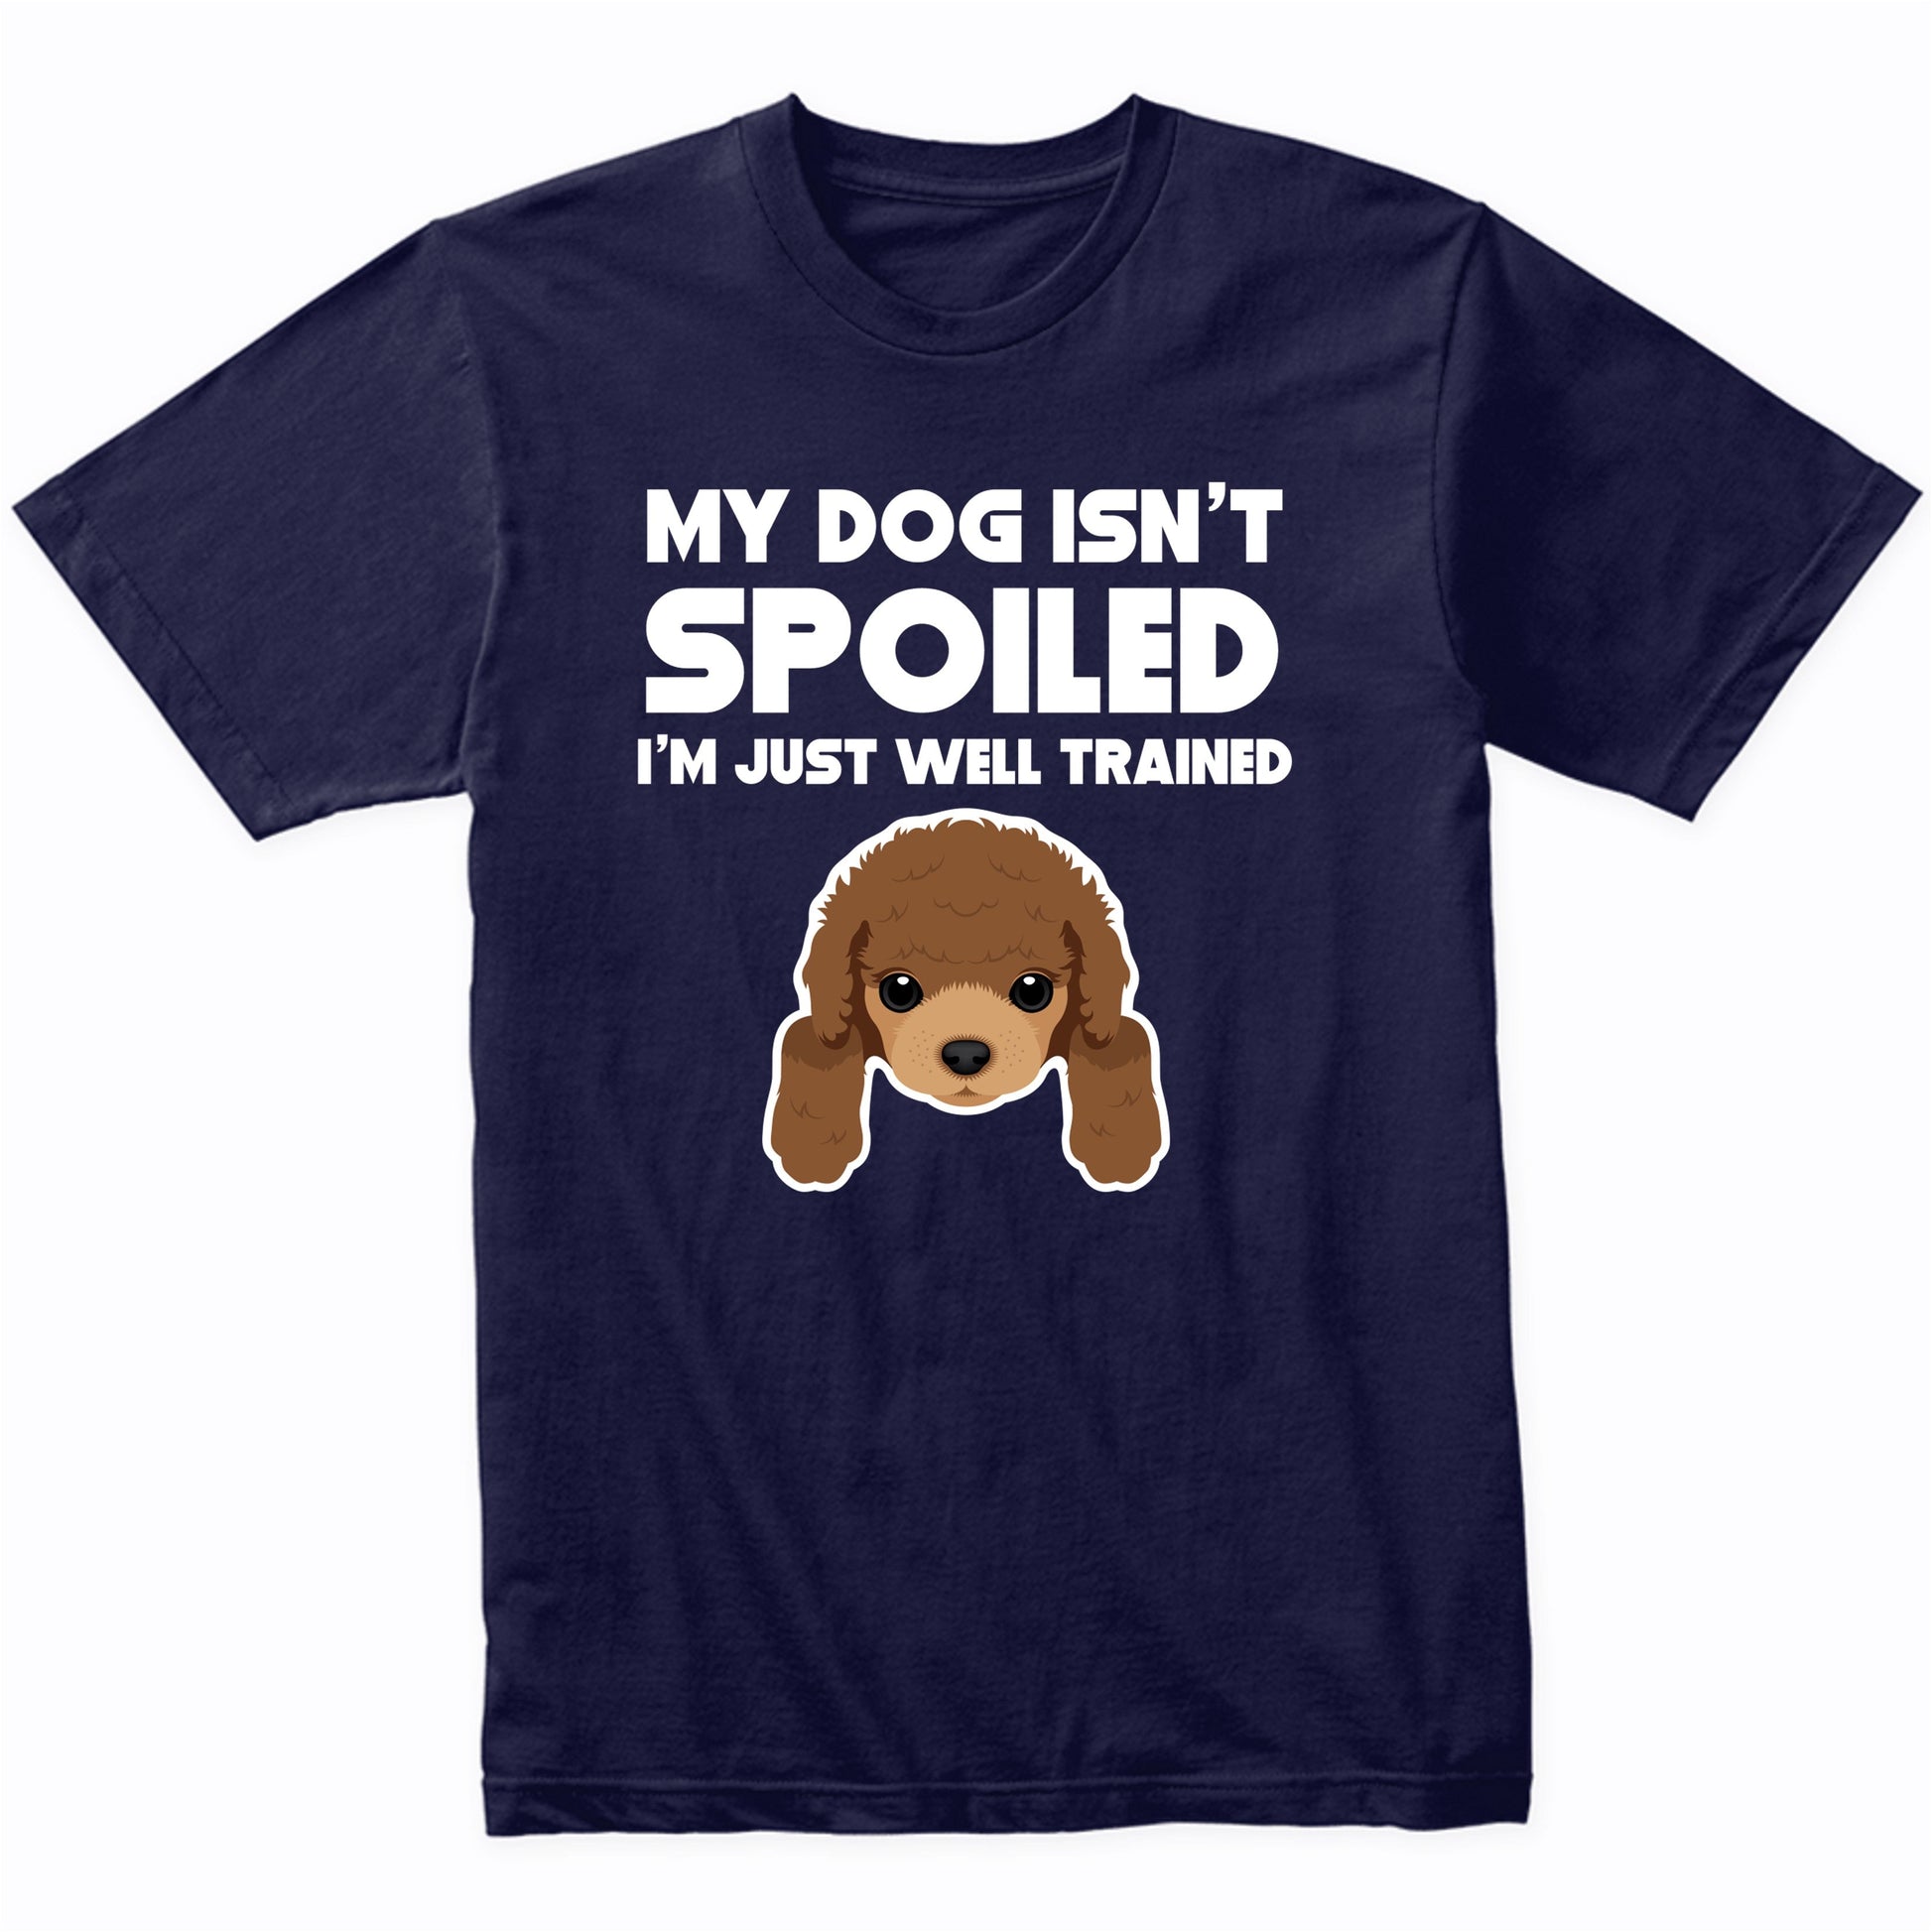 My Dog Isn't Spoiled I'm Just Well Trained Funny Poodle T-Shirt